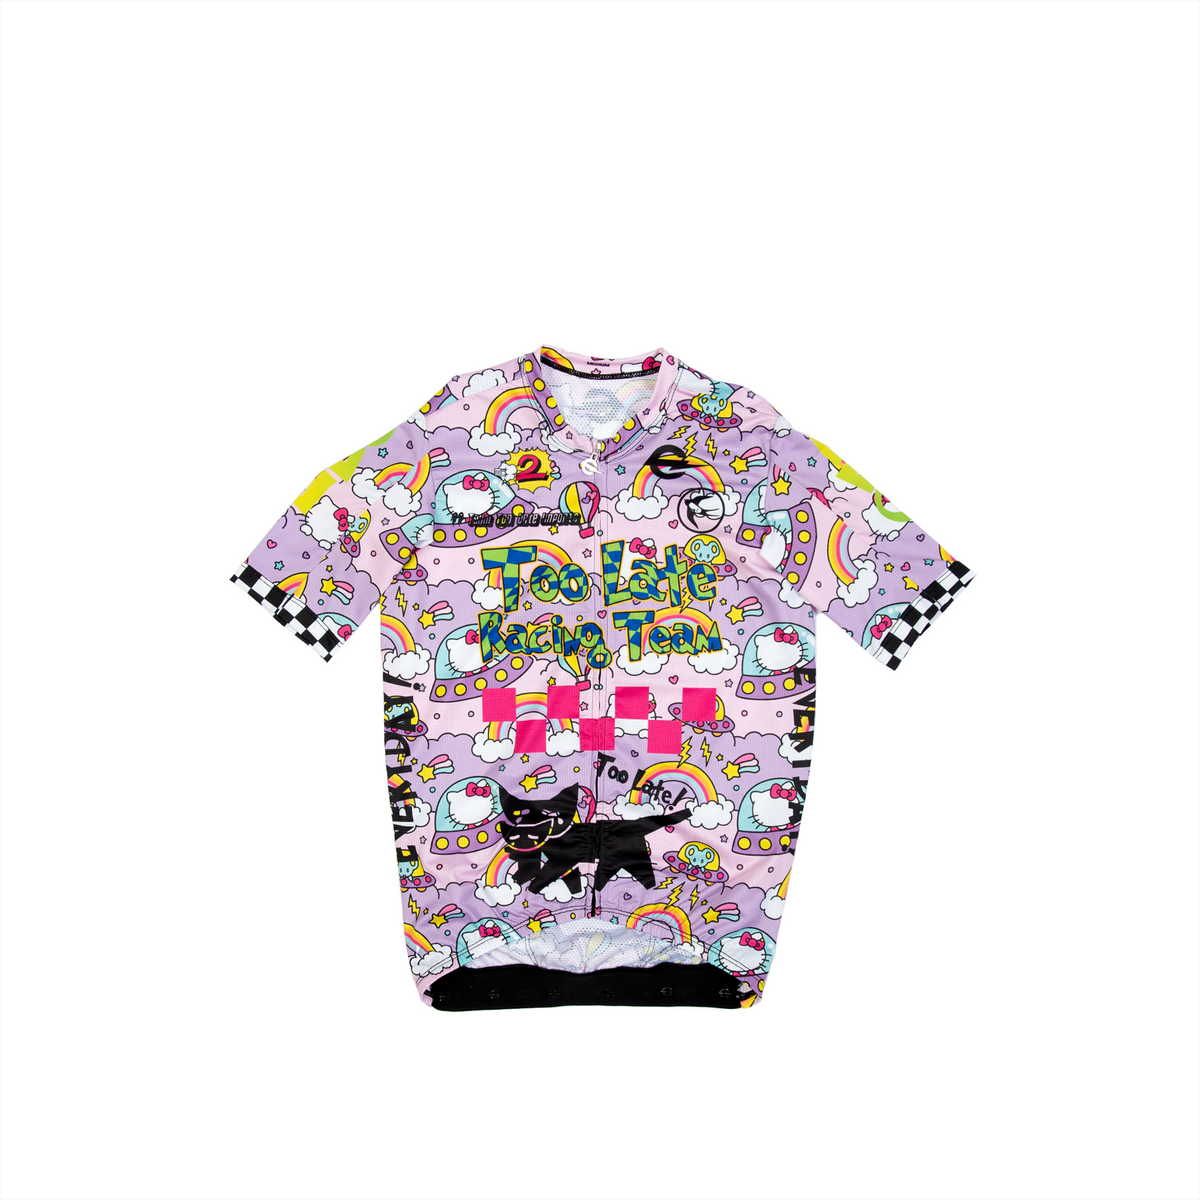 TEAM TOO LATE - WOMEN'S LADERA JERSEY - MEOW